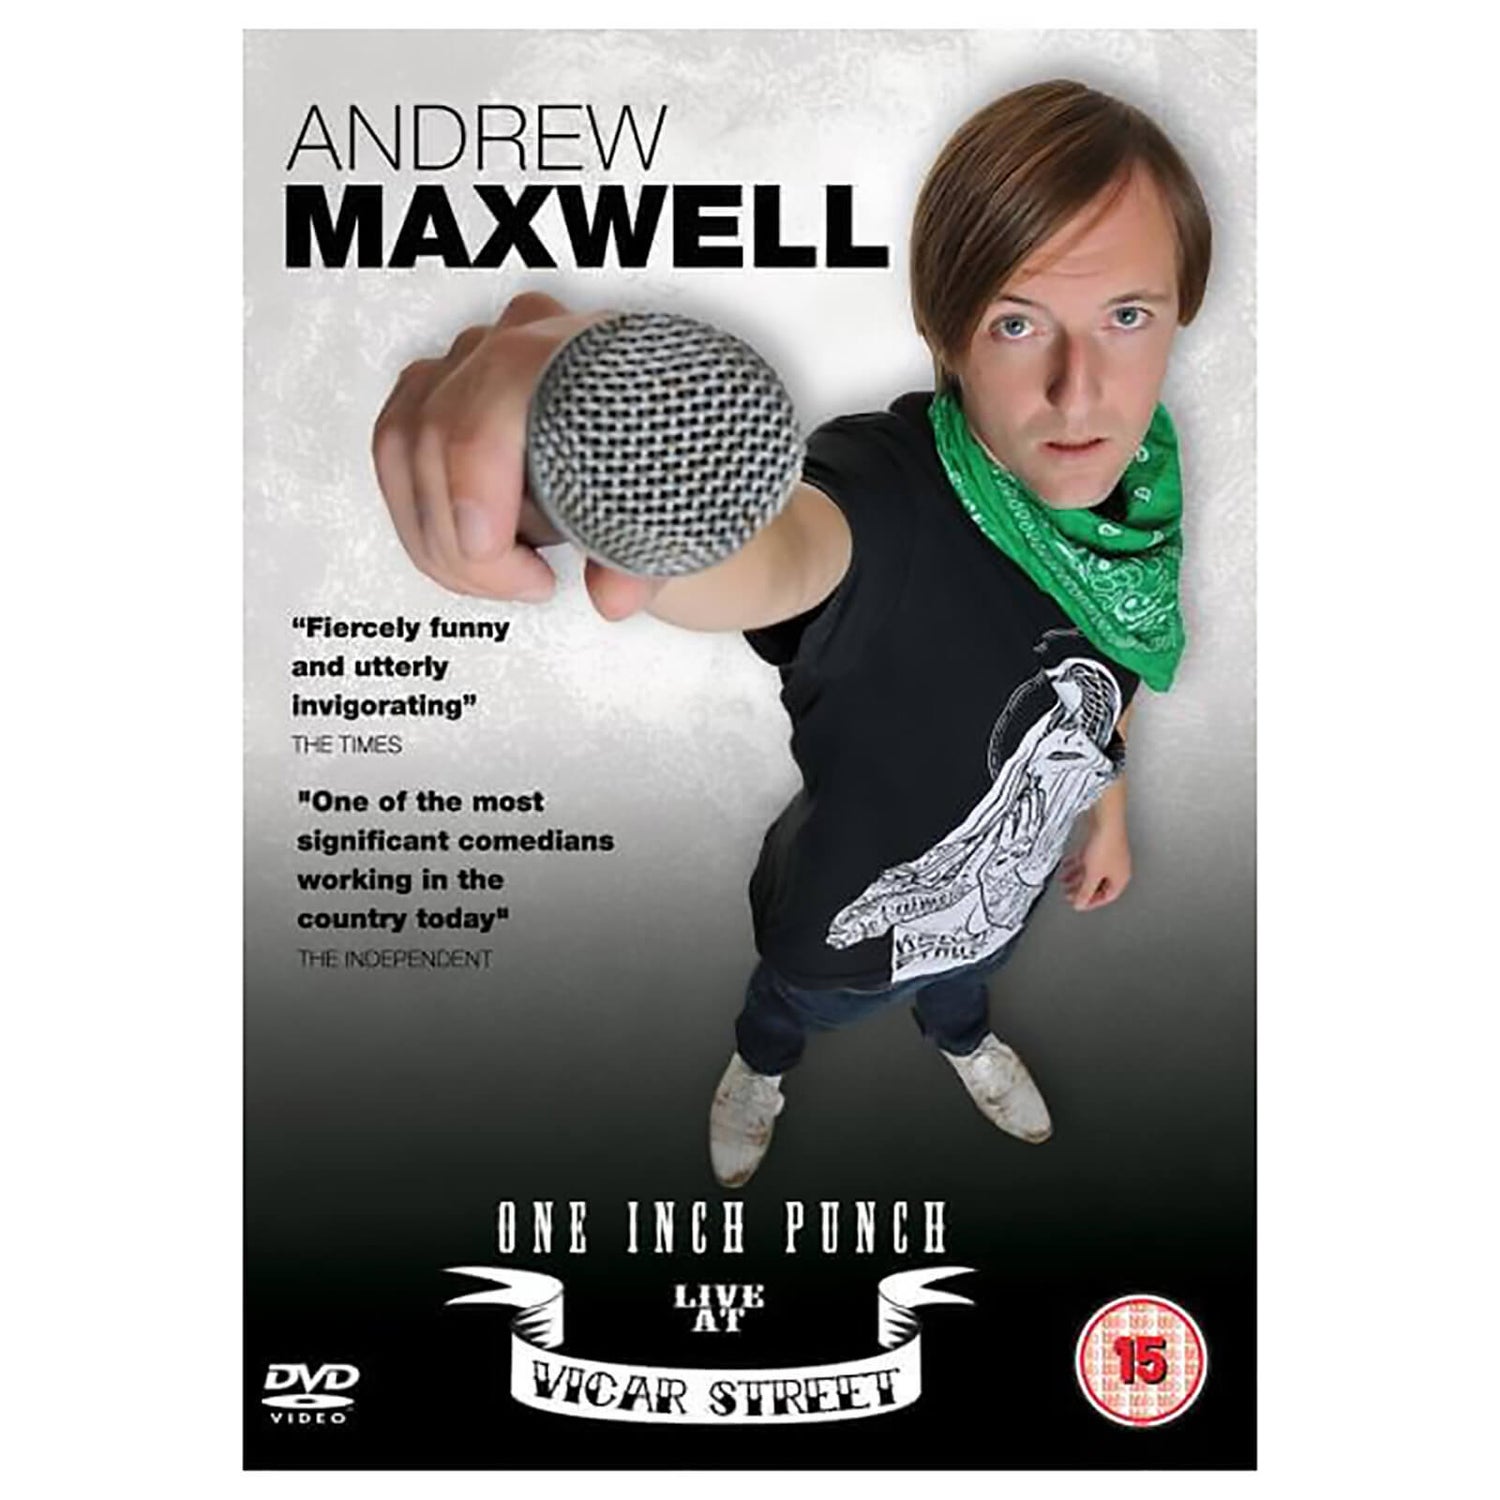 Andrew Maxwell: One Inch Punch  Live at Vicar Street